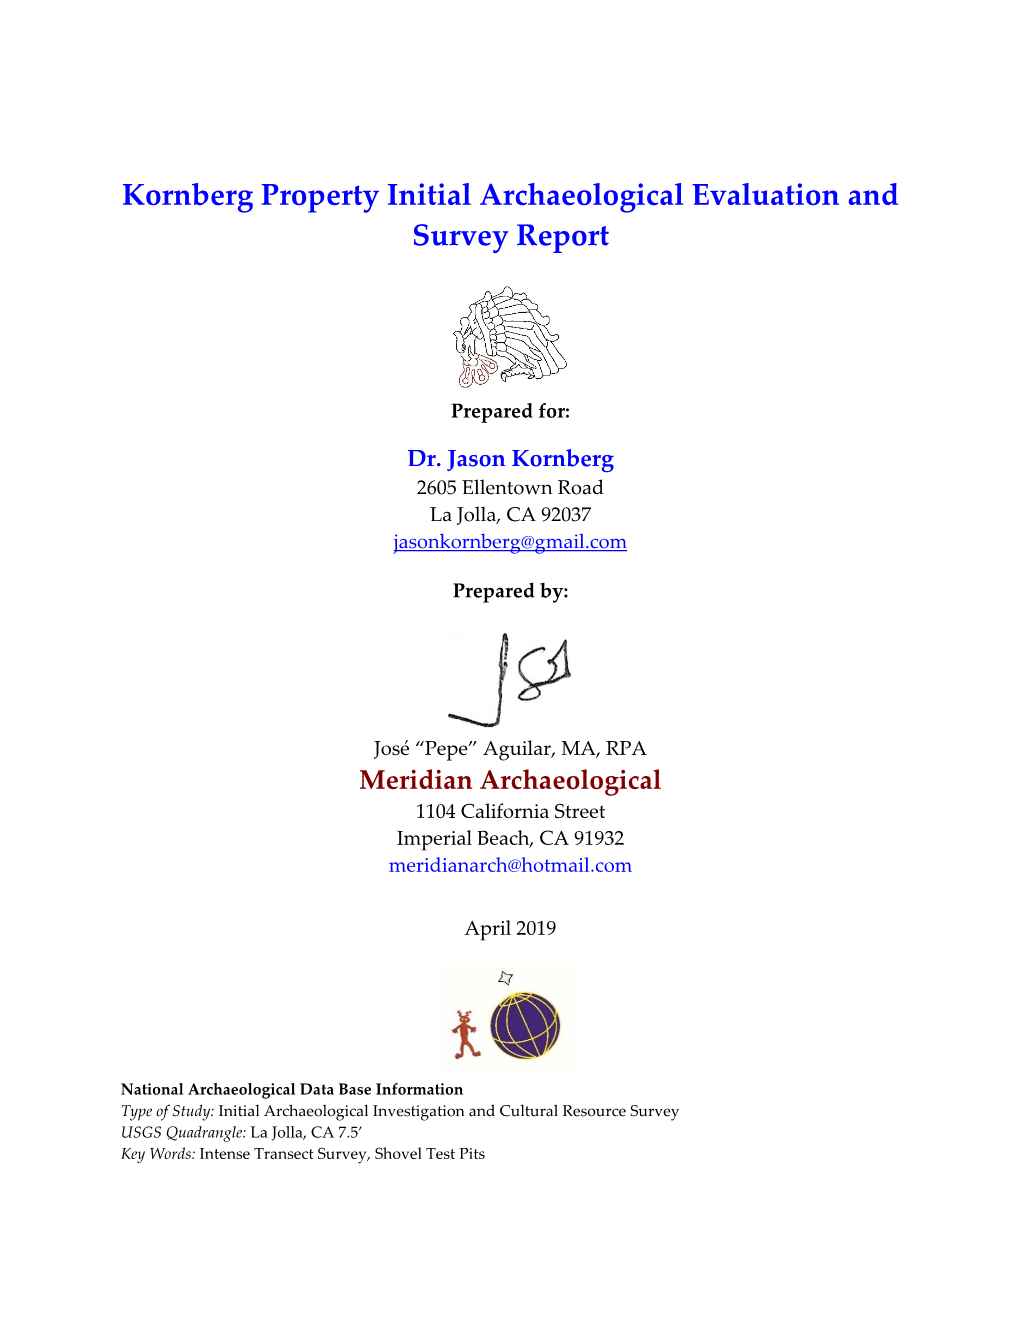 Archaeological Evaluation and Survey Report